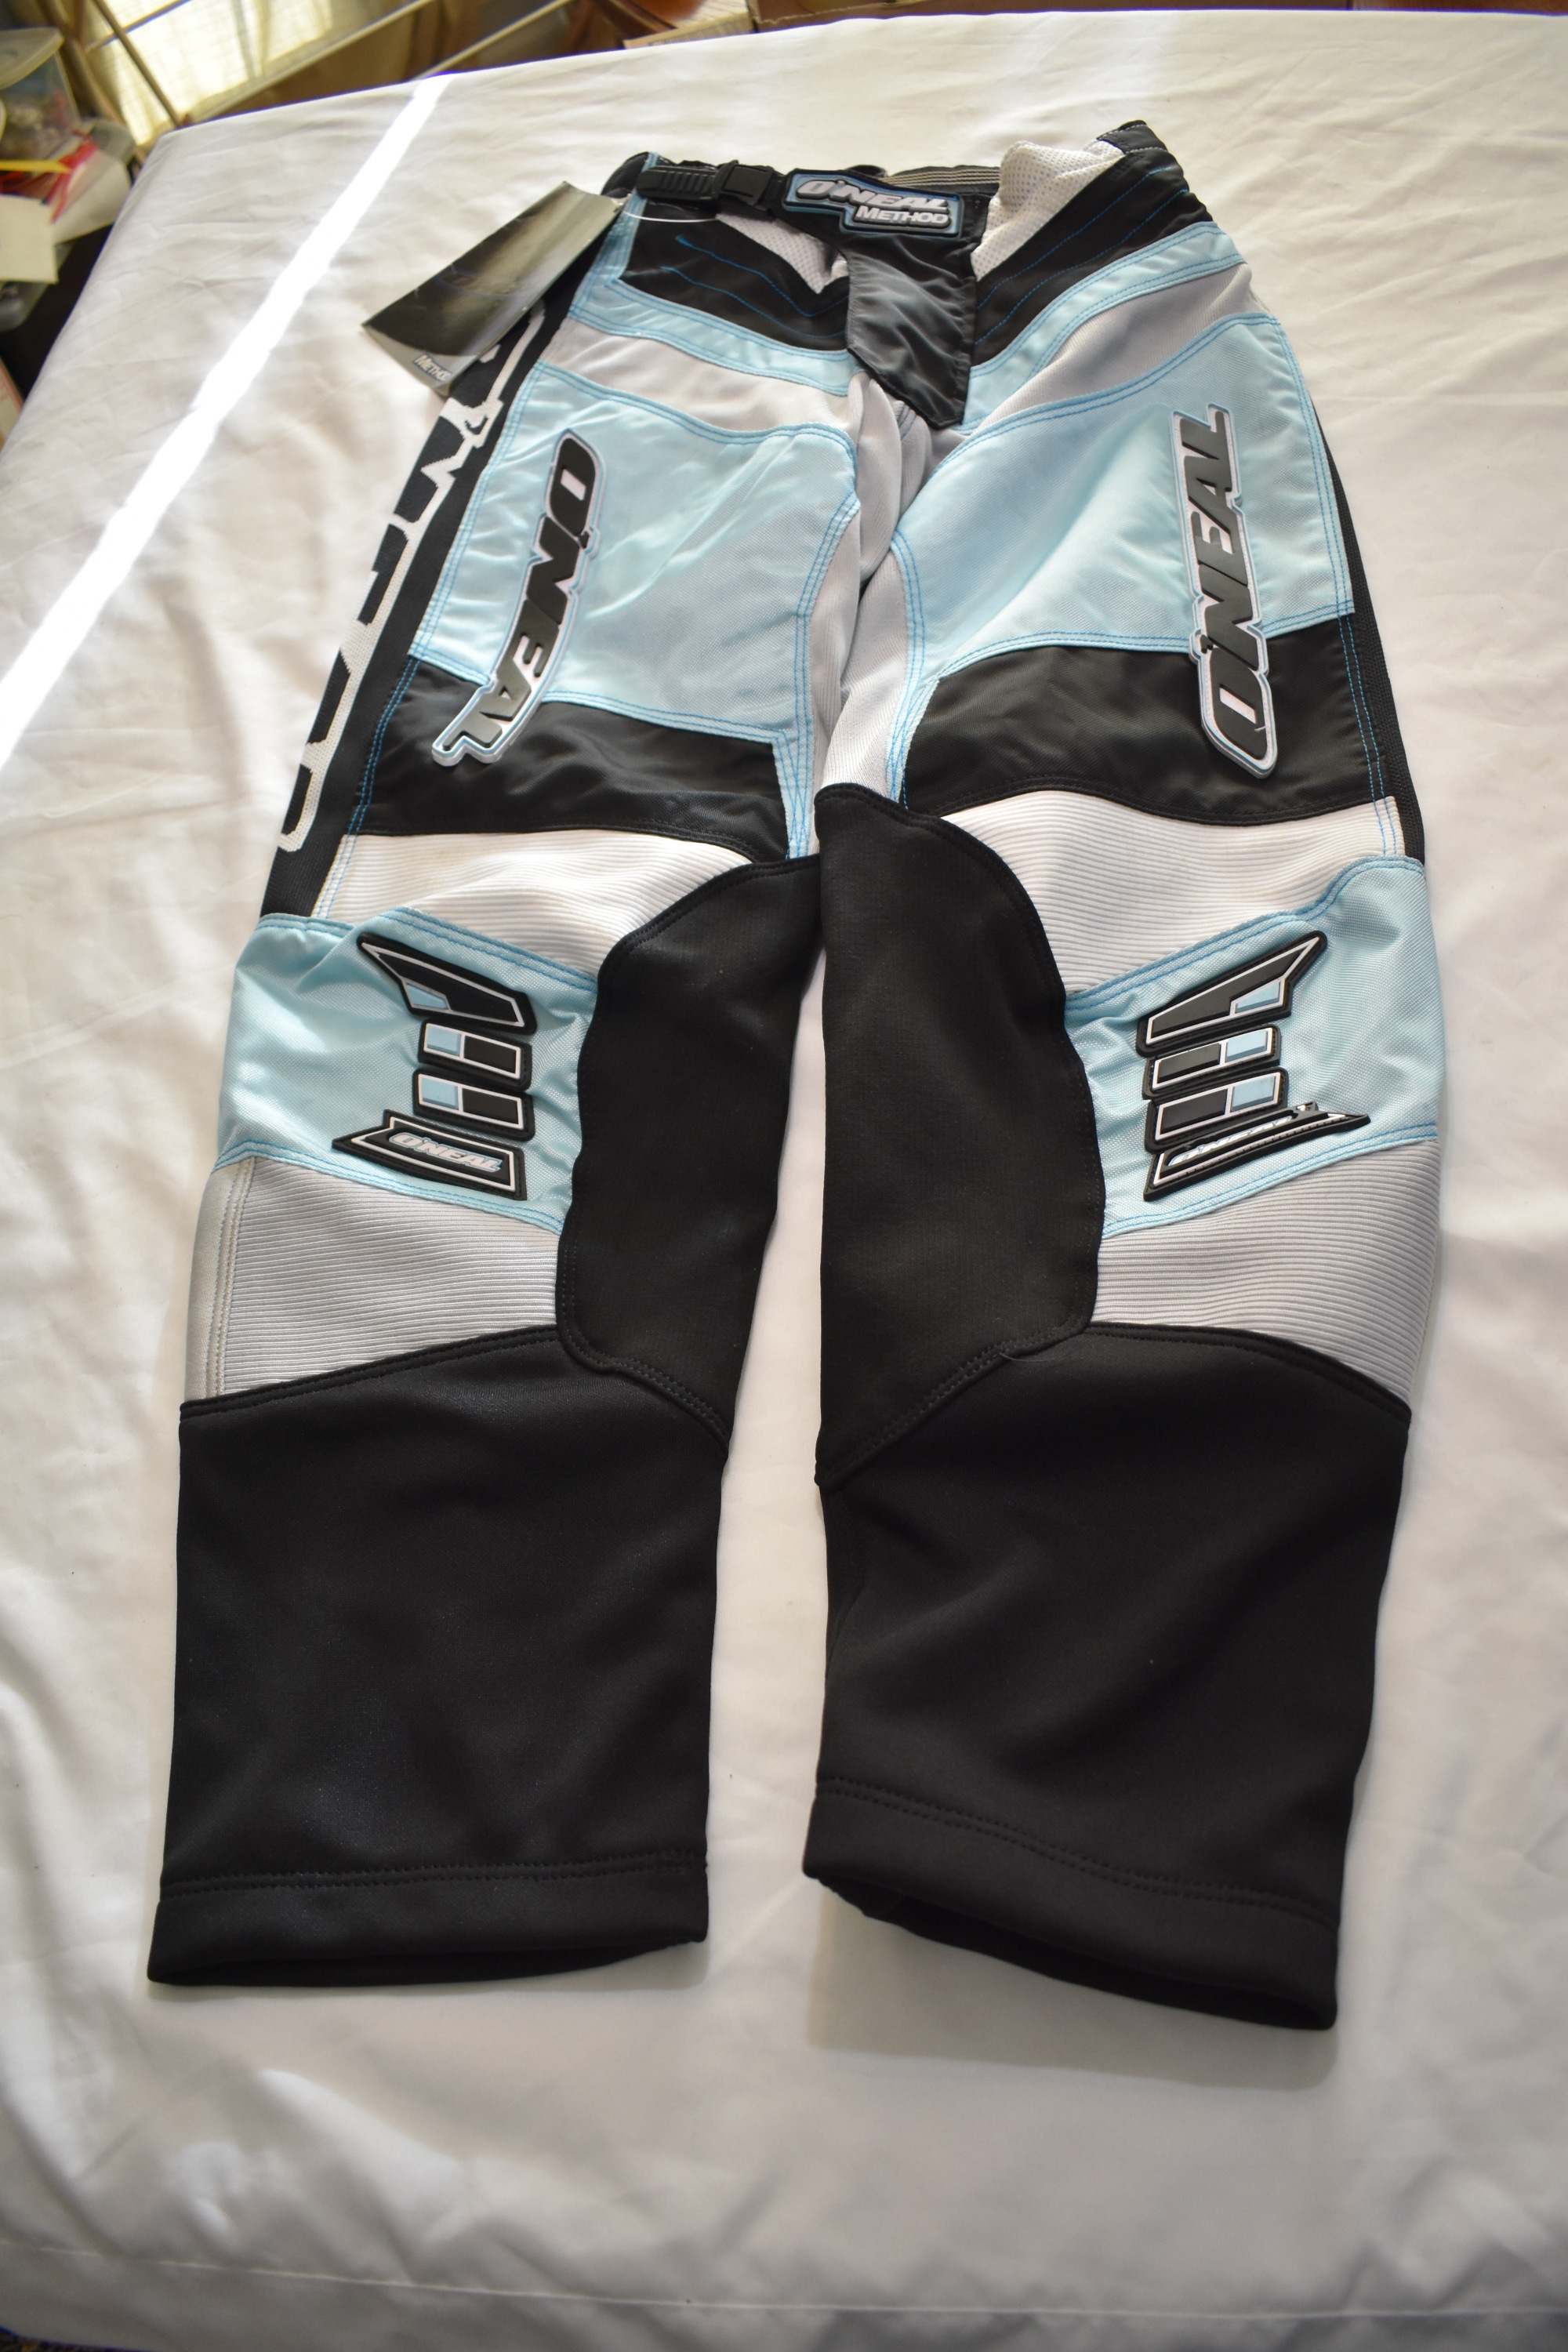 NEW - O'Neal Method Motocross Pants, Women's 3/4 - With Tags!